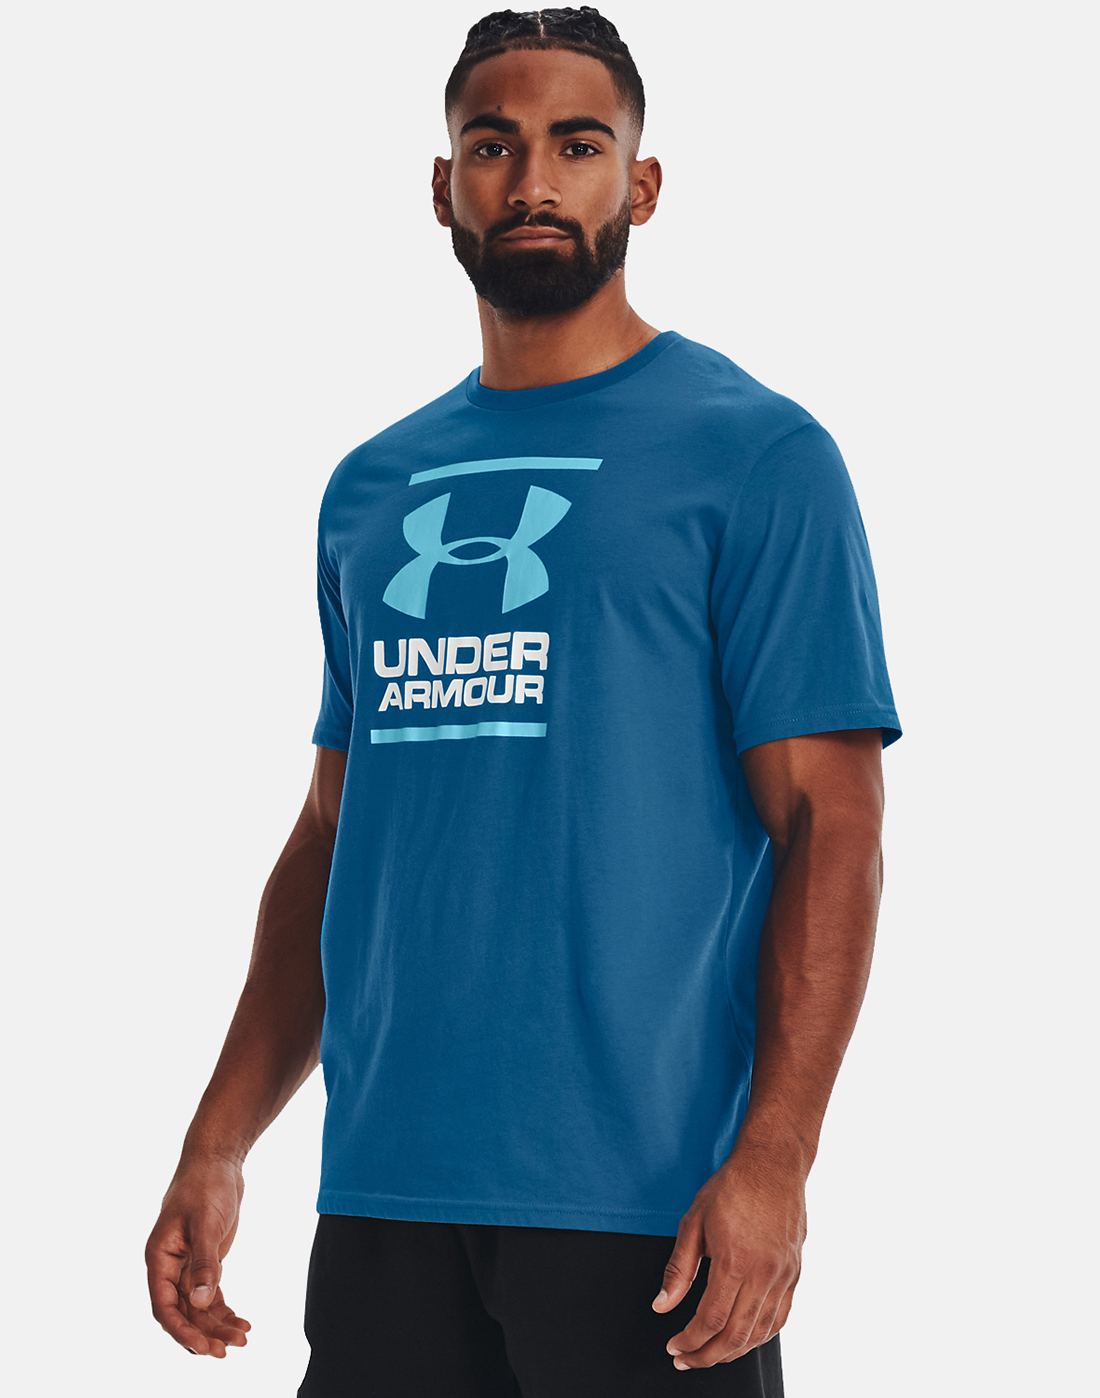 Under Armour Mens GL Foundation T-shirt - Blue | Life Style Sports UK